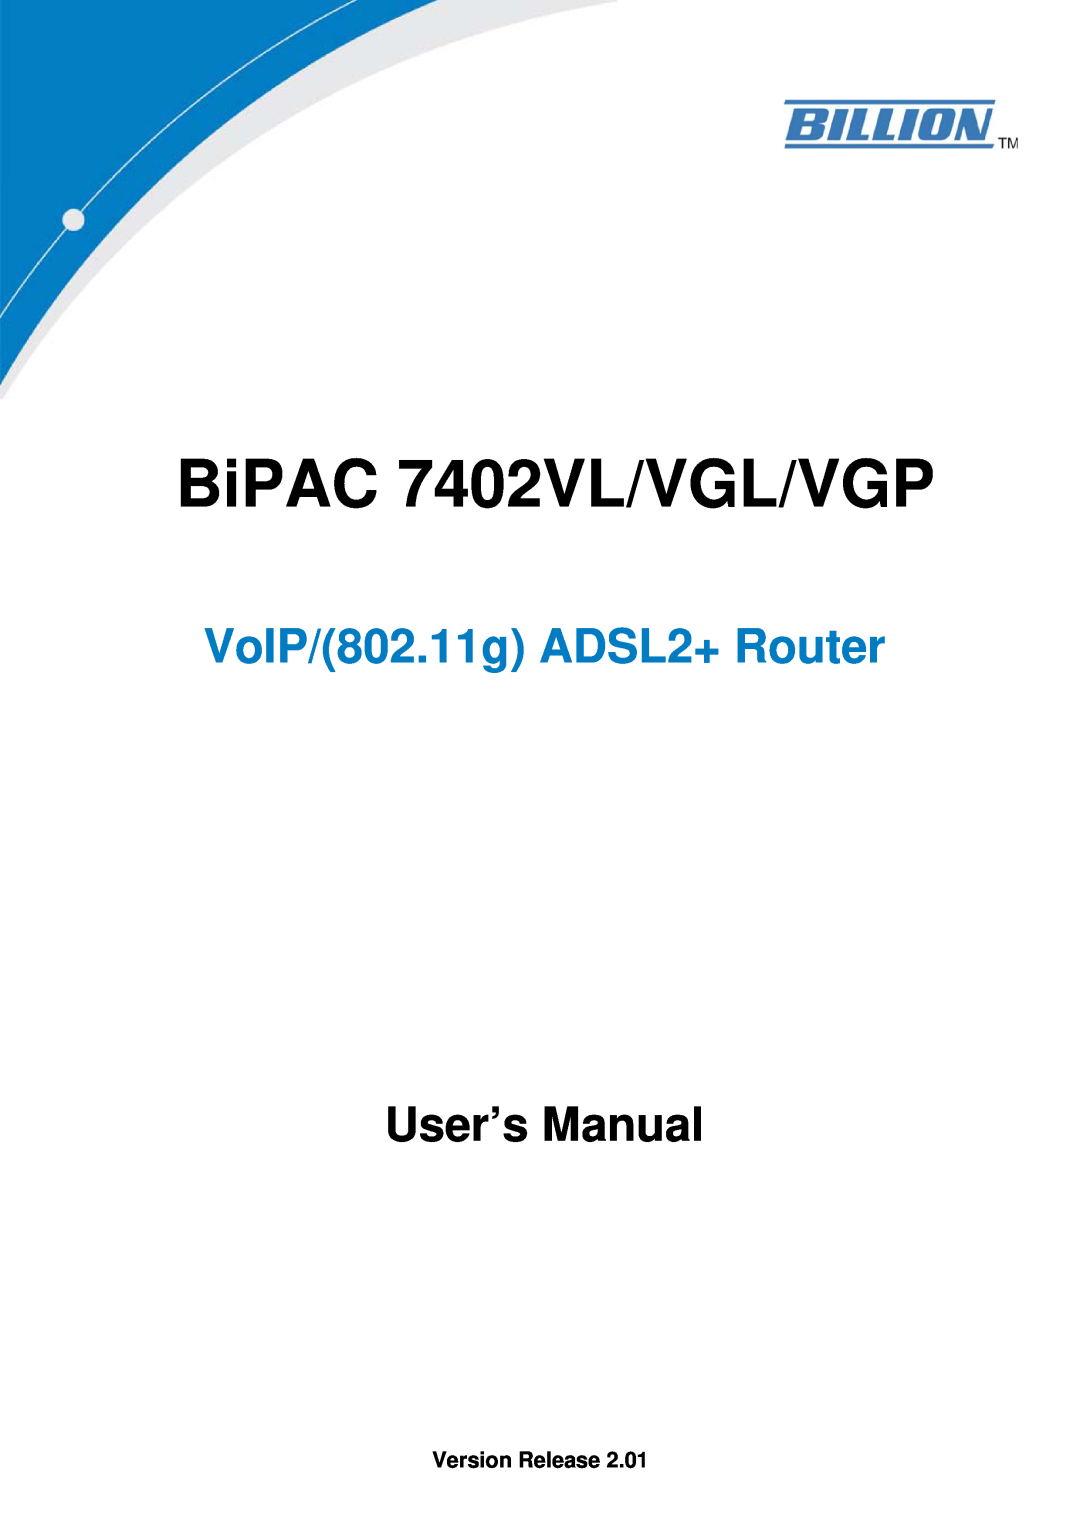 Billion Electric Company user manual Version Release, BiPAC 7402VL/VGL/VGP, VoIP/802.11g ADSL2+ Router, User’s Manual 